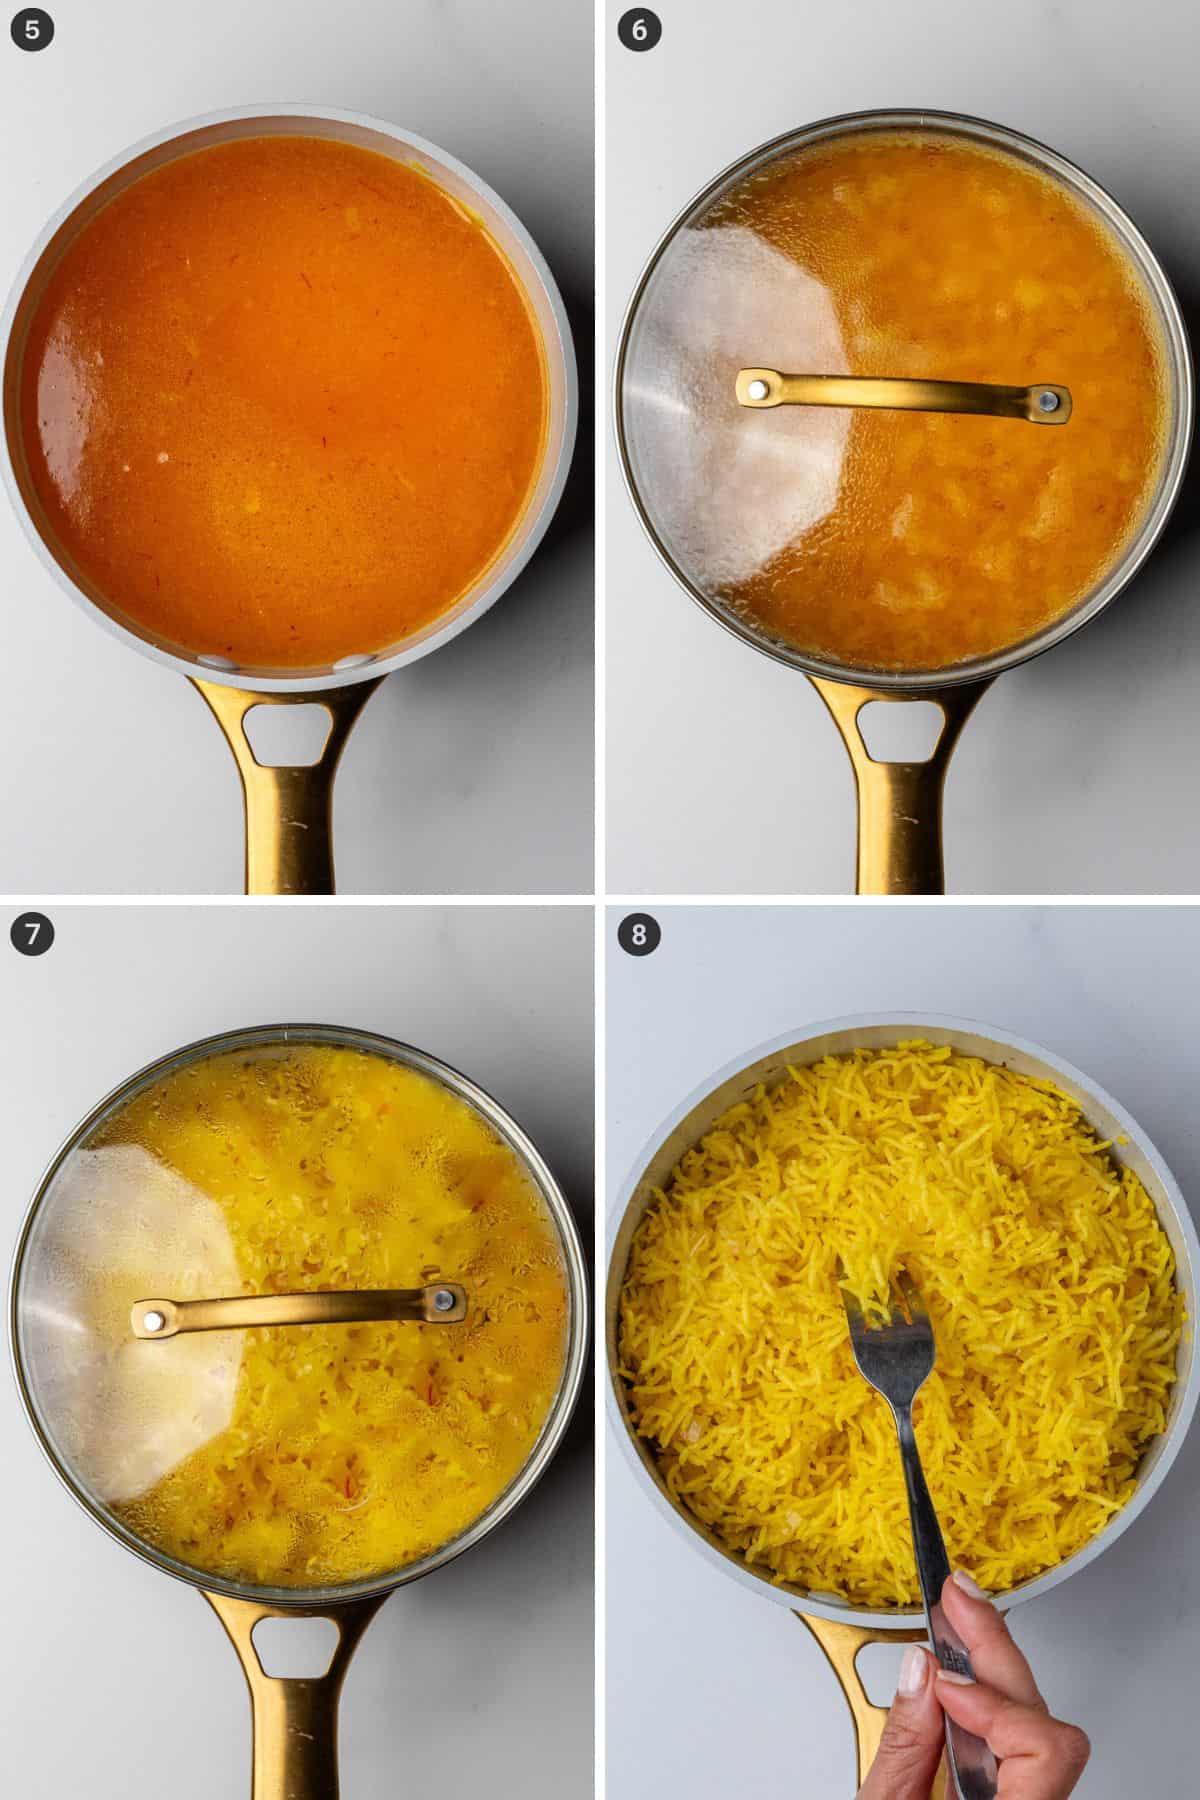 Steps on how to cook saffron rice